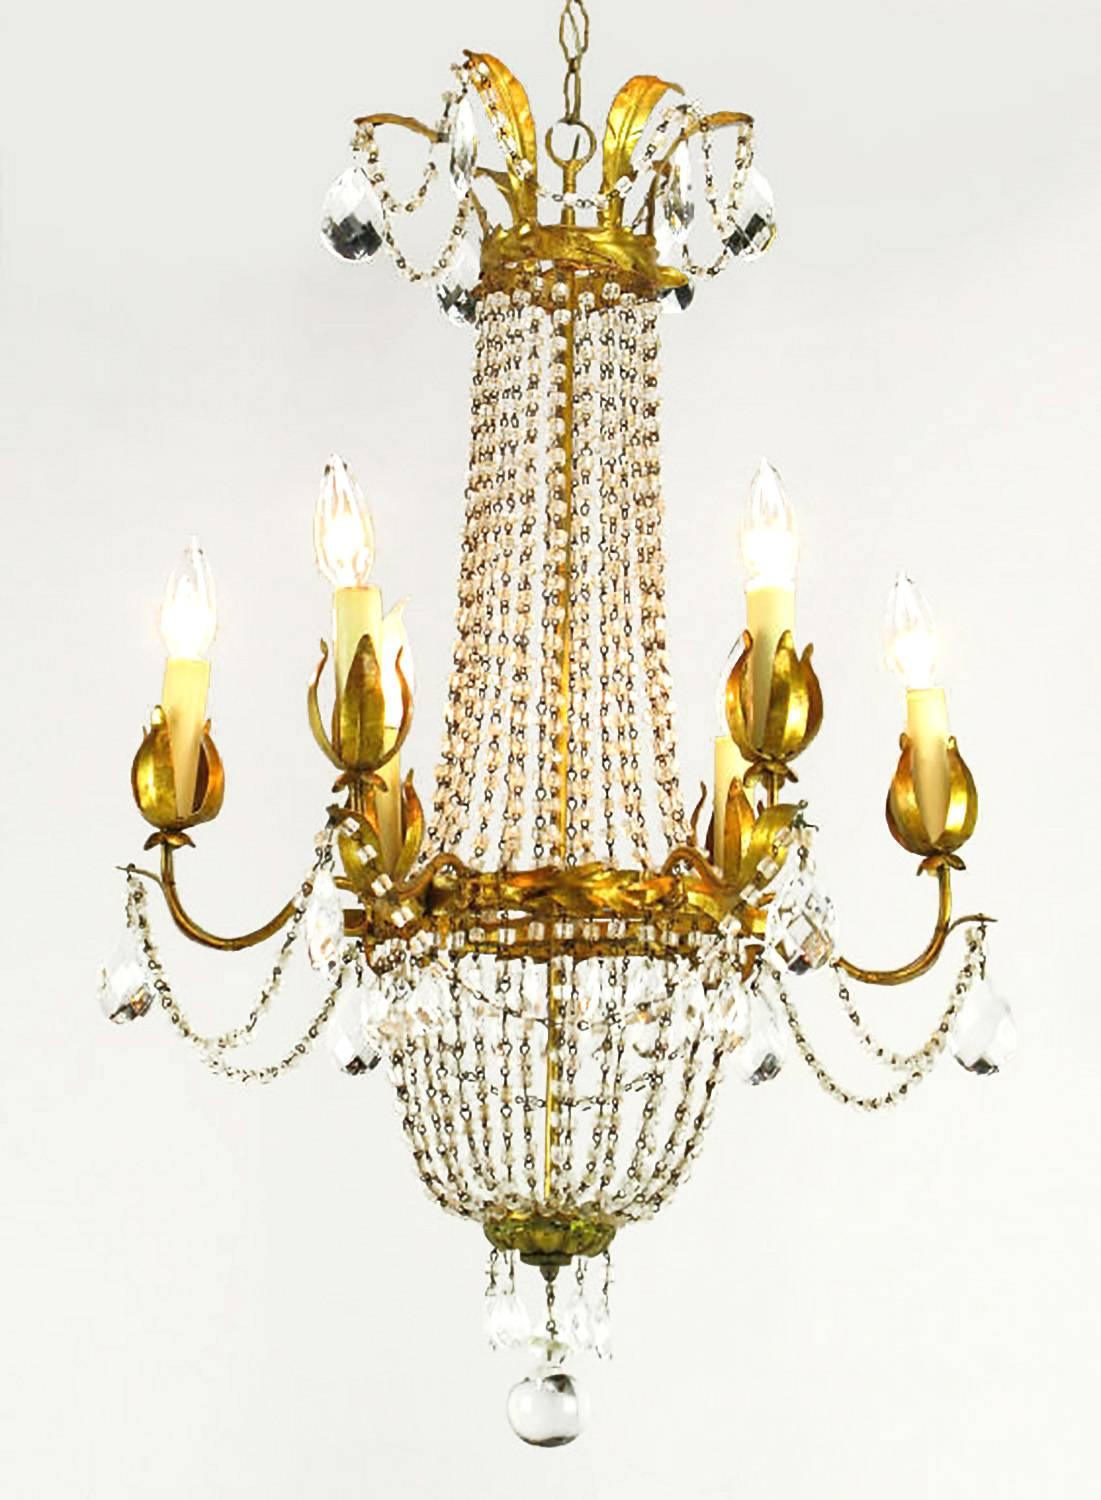 Elegant gilt Italian tole metal and iron crystal basket form chandelier with six arms. Adorned with real wax and pressed paper tube candles, draped with cut pear-shaped crystals and crystal strands. It is finished with a large crystal sphere